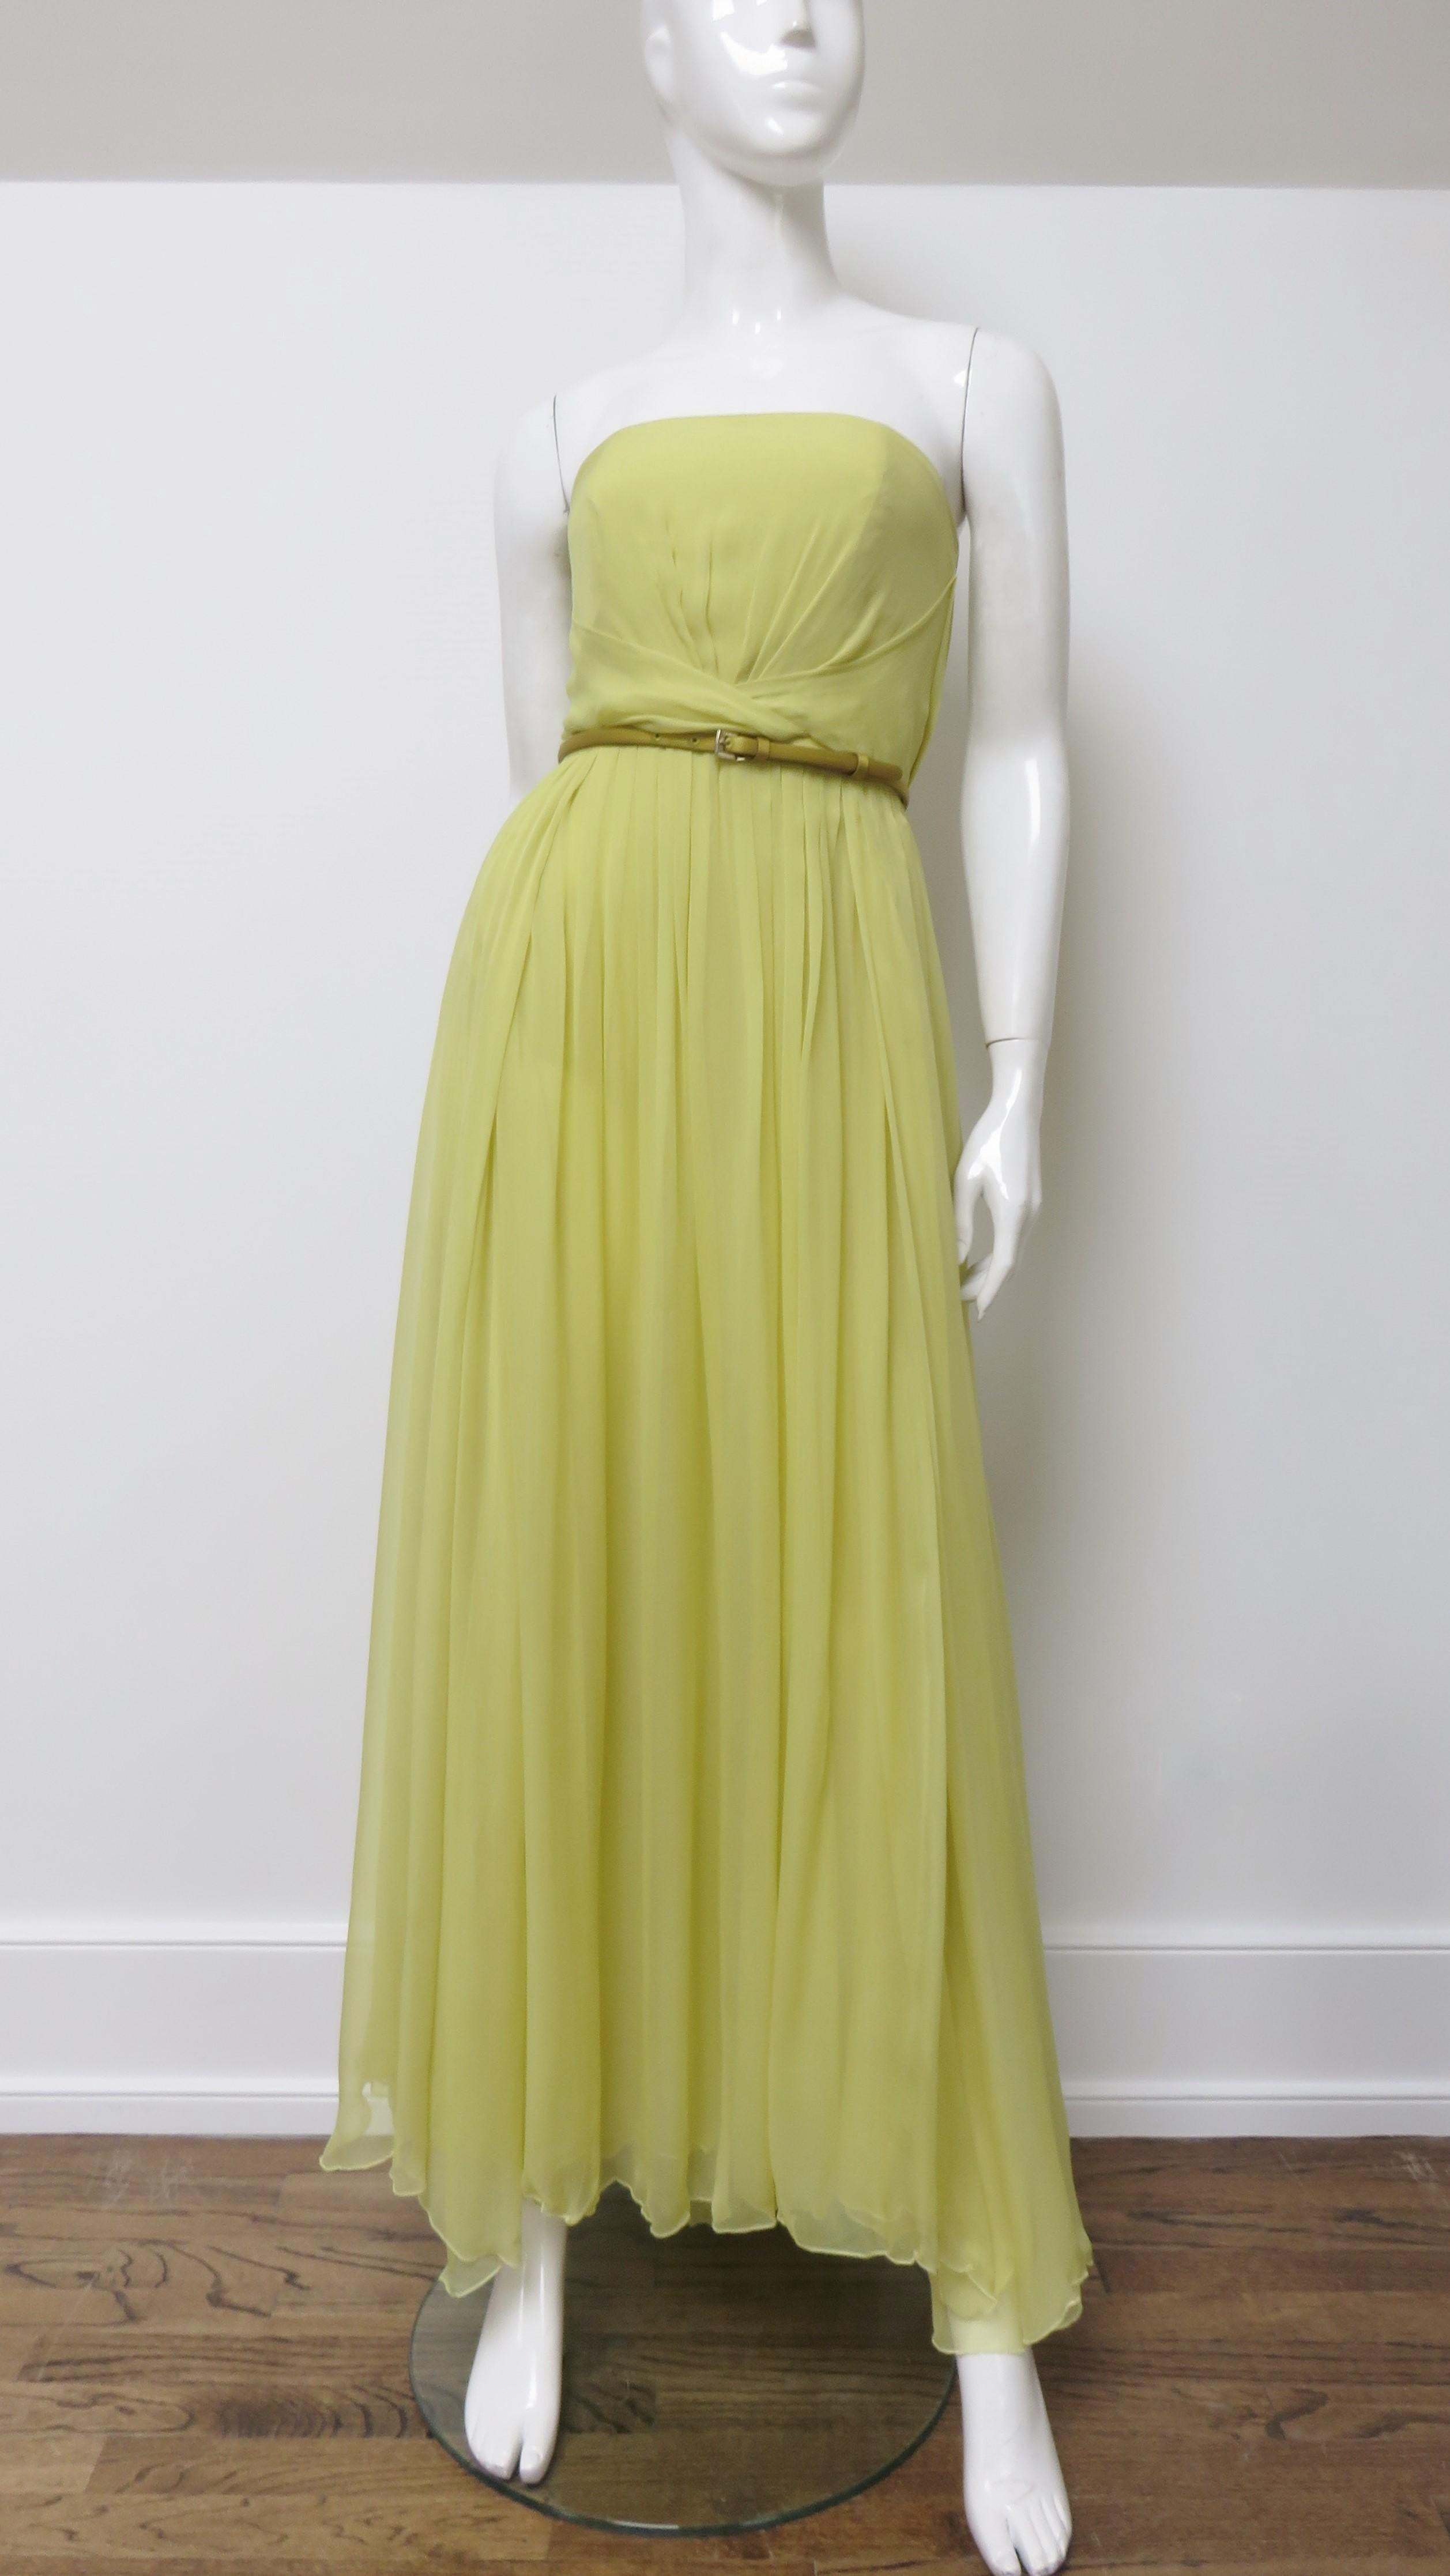 A spectacular fine silk gown with matching wrap, belt, and hot pants in shades of yellow from Gucci. The strapless gown has an inner boned corset and waist detailing. The double layer skirt has multiple thigh high slits around it's circumference